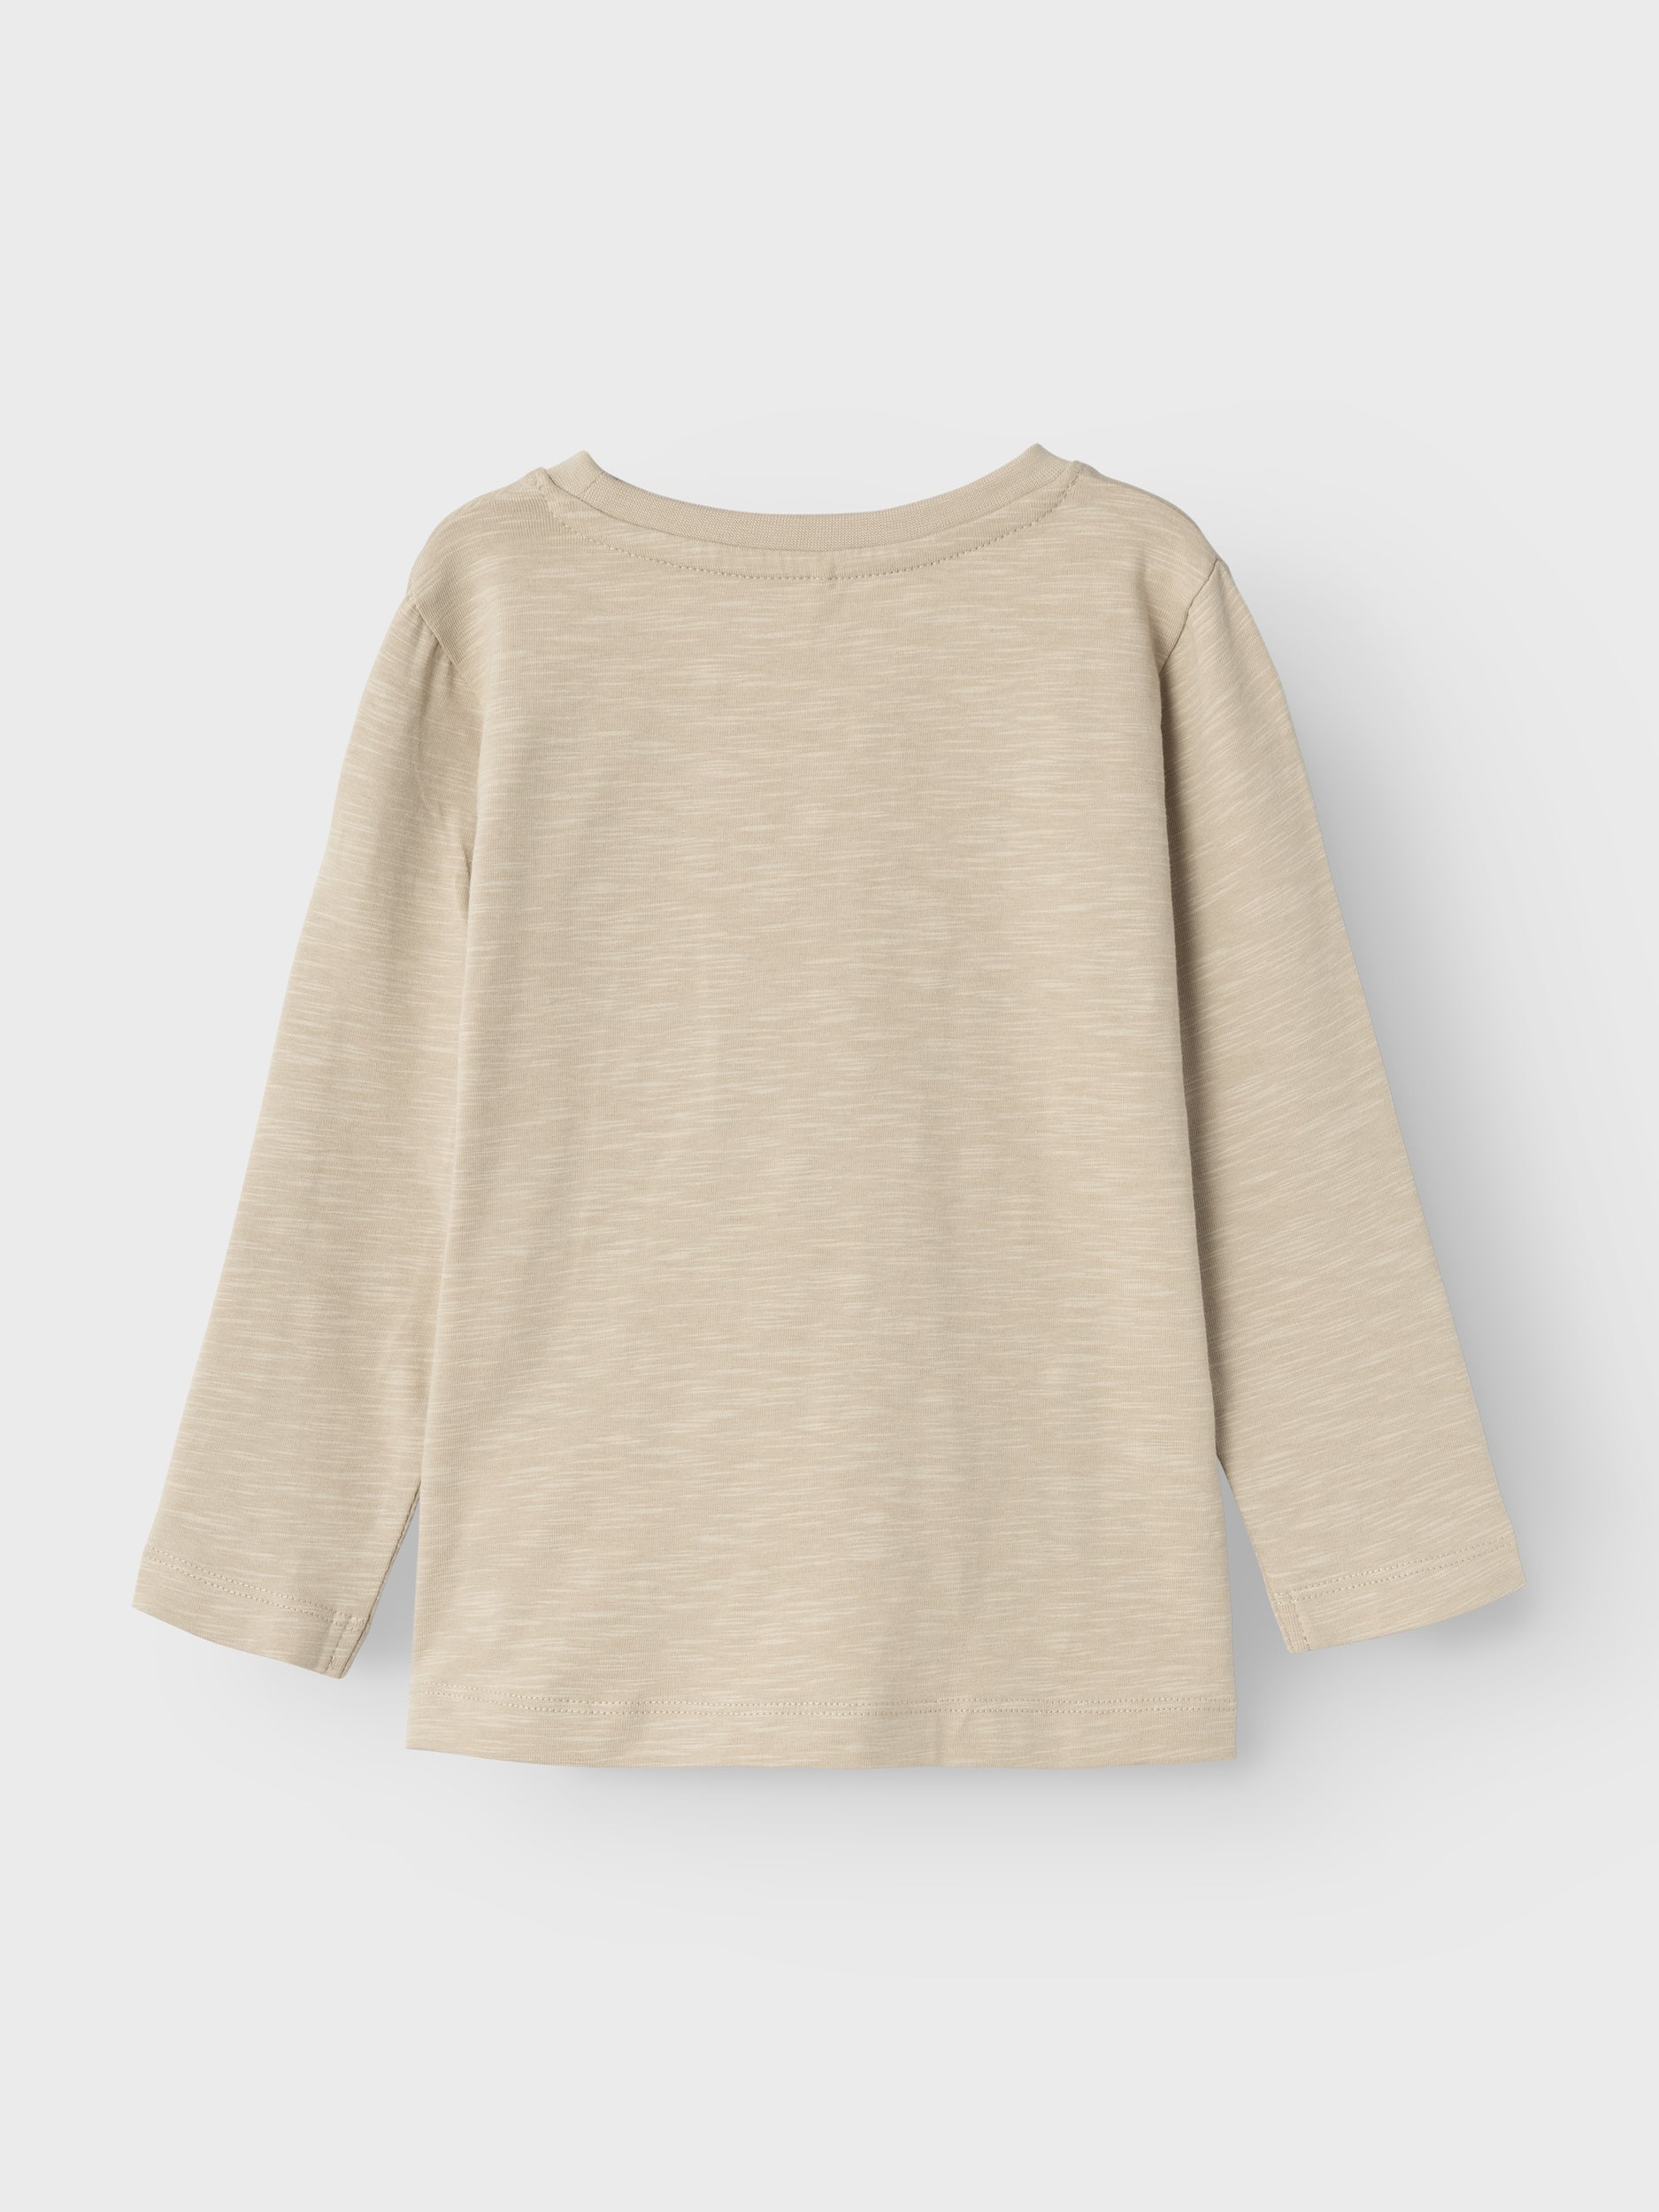 Boy's Benny Long Sleeve Top-Pure Cashmere-Back View